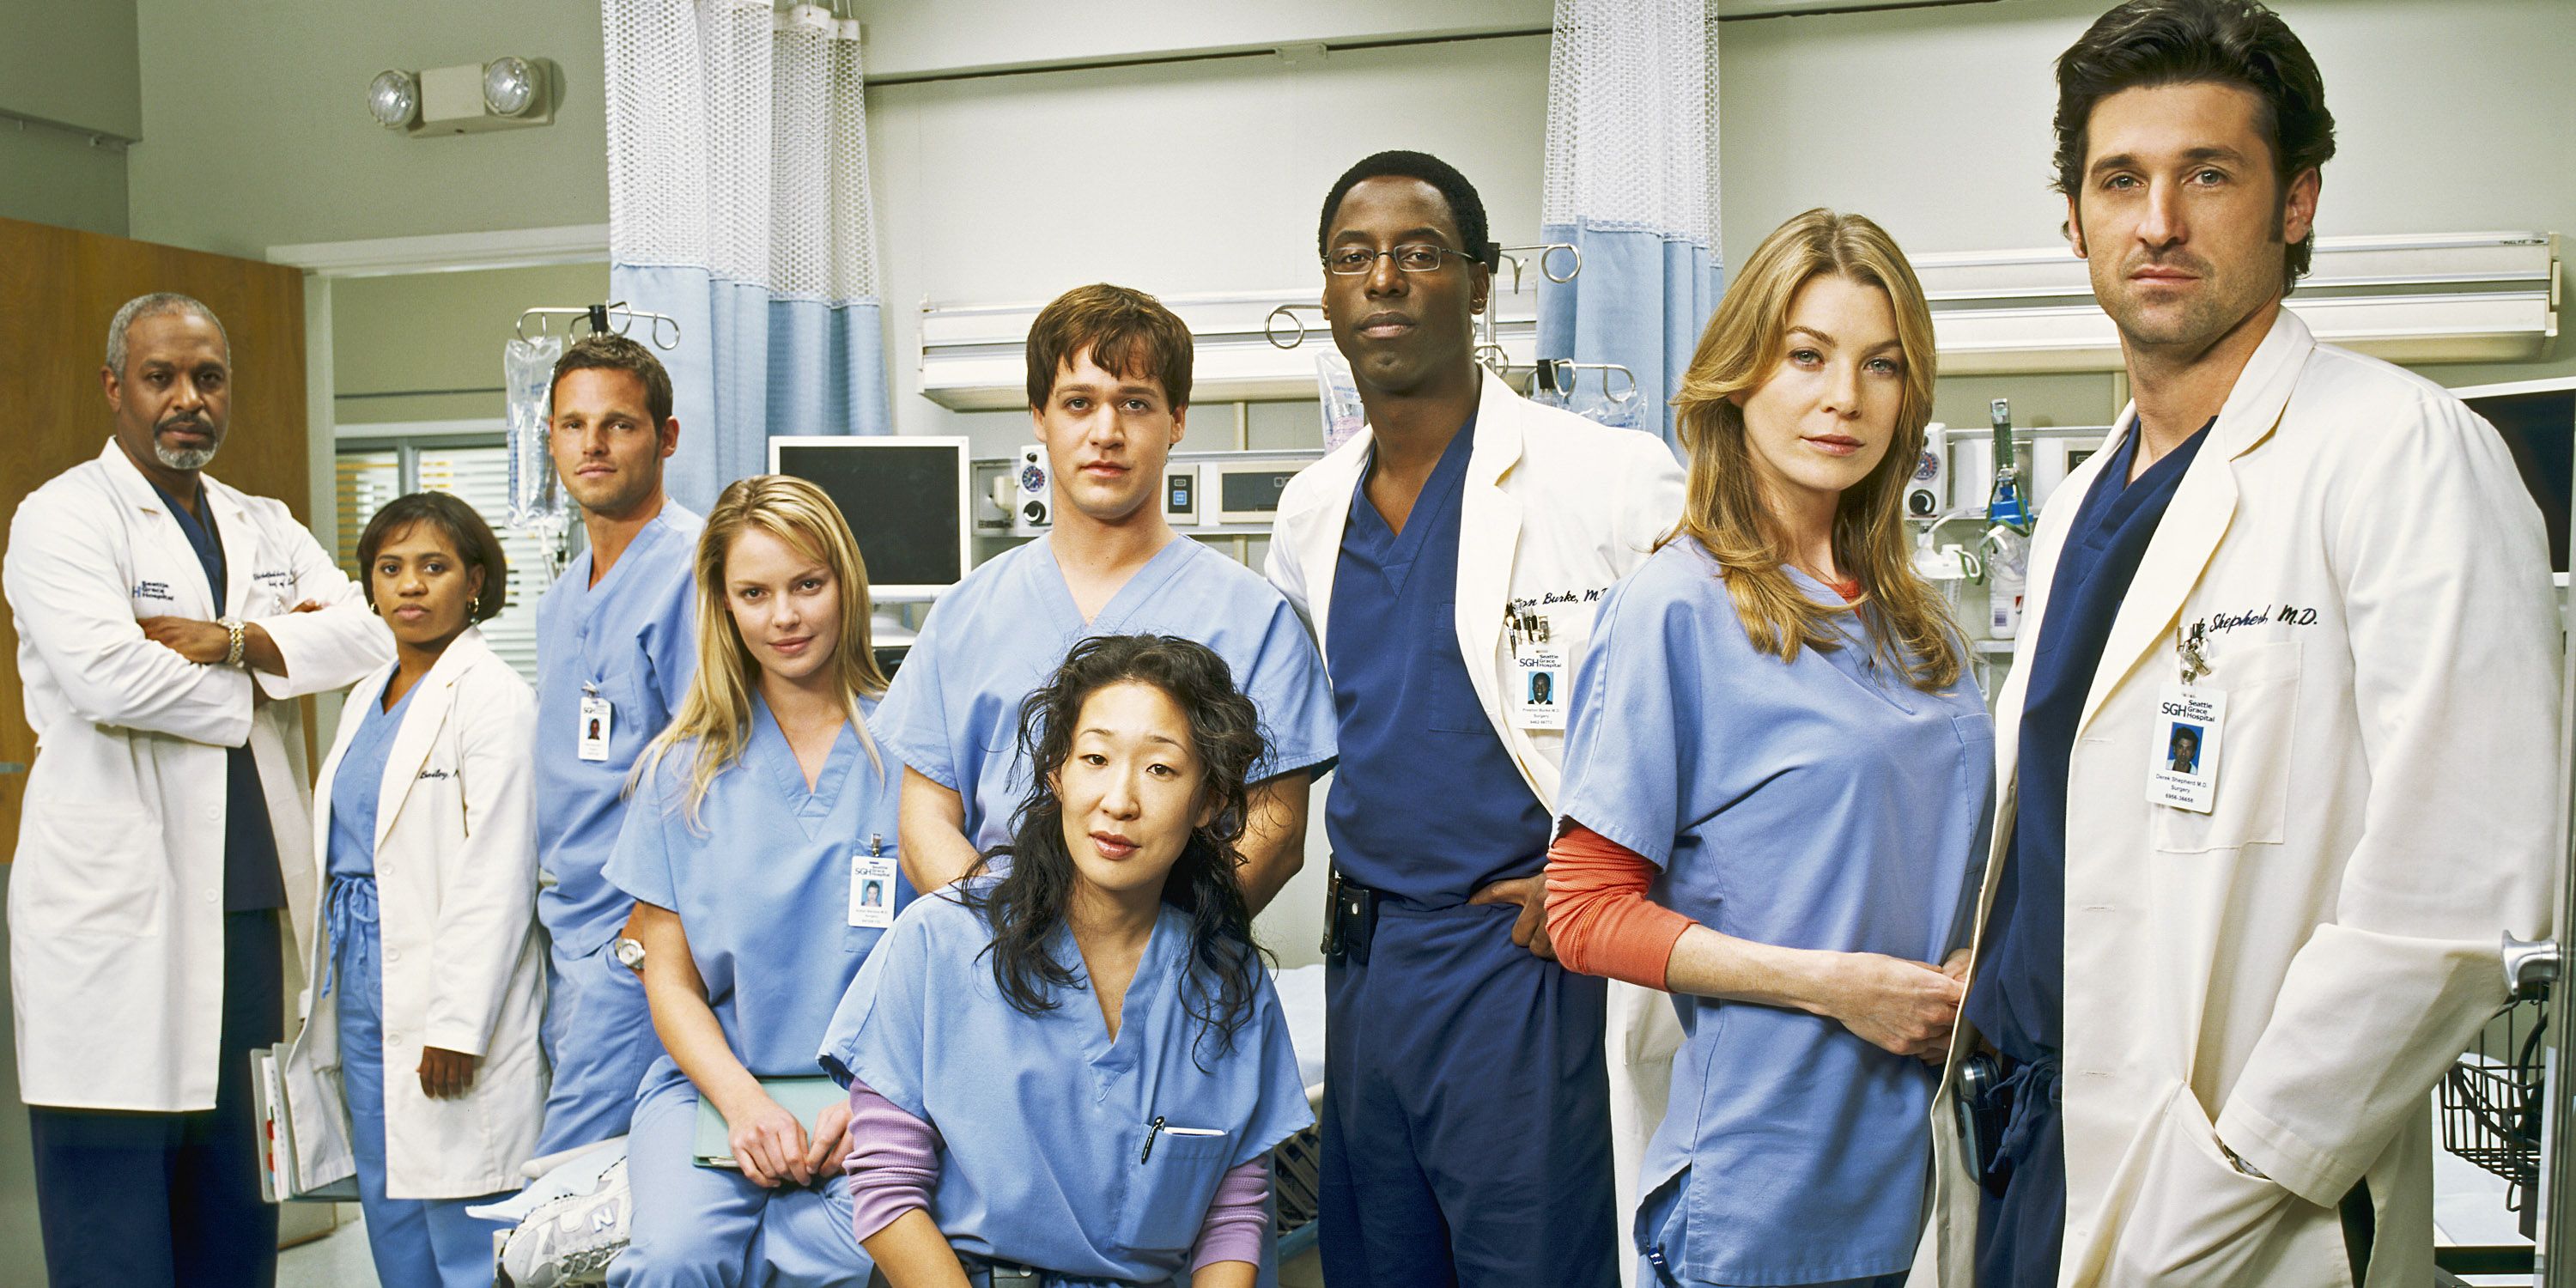 Comfort Viewing: Why I Still Love 'Grey's Anatomy' - The New York